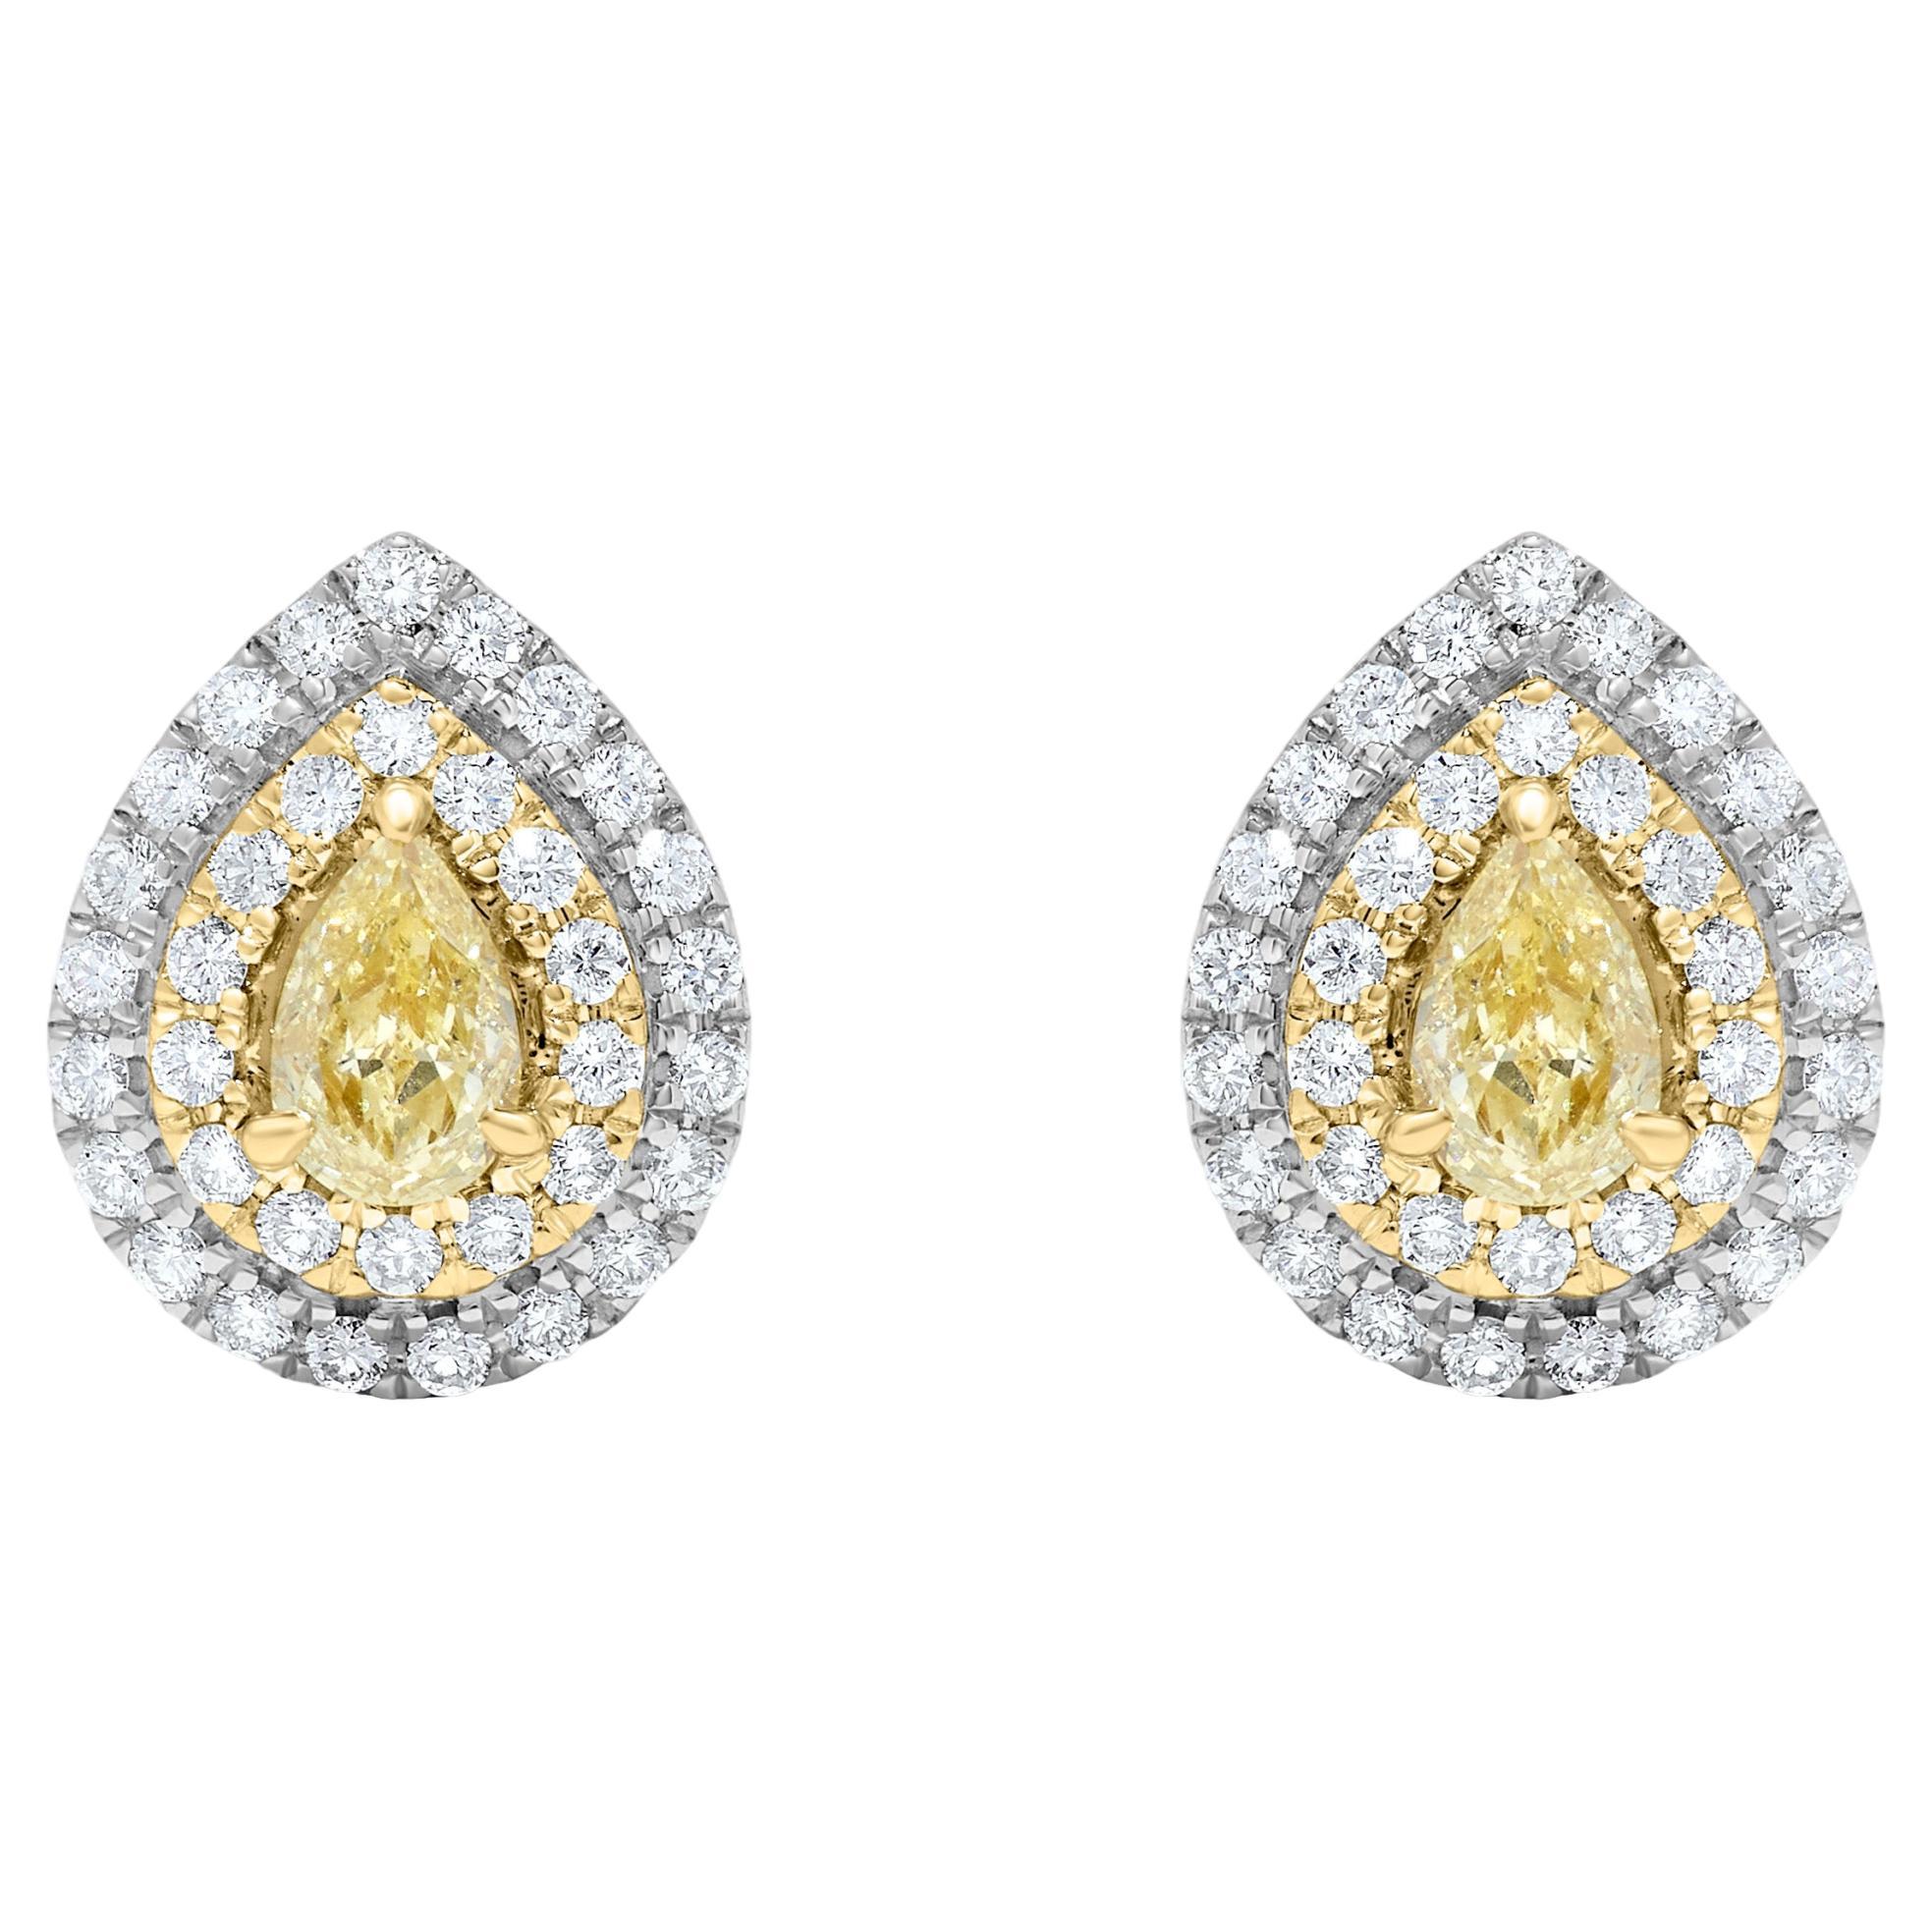 Natural Yellow Pear-Shape and White Diamond 1.14 Carat TW Gold Stud Earrings